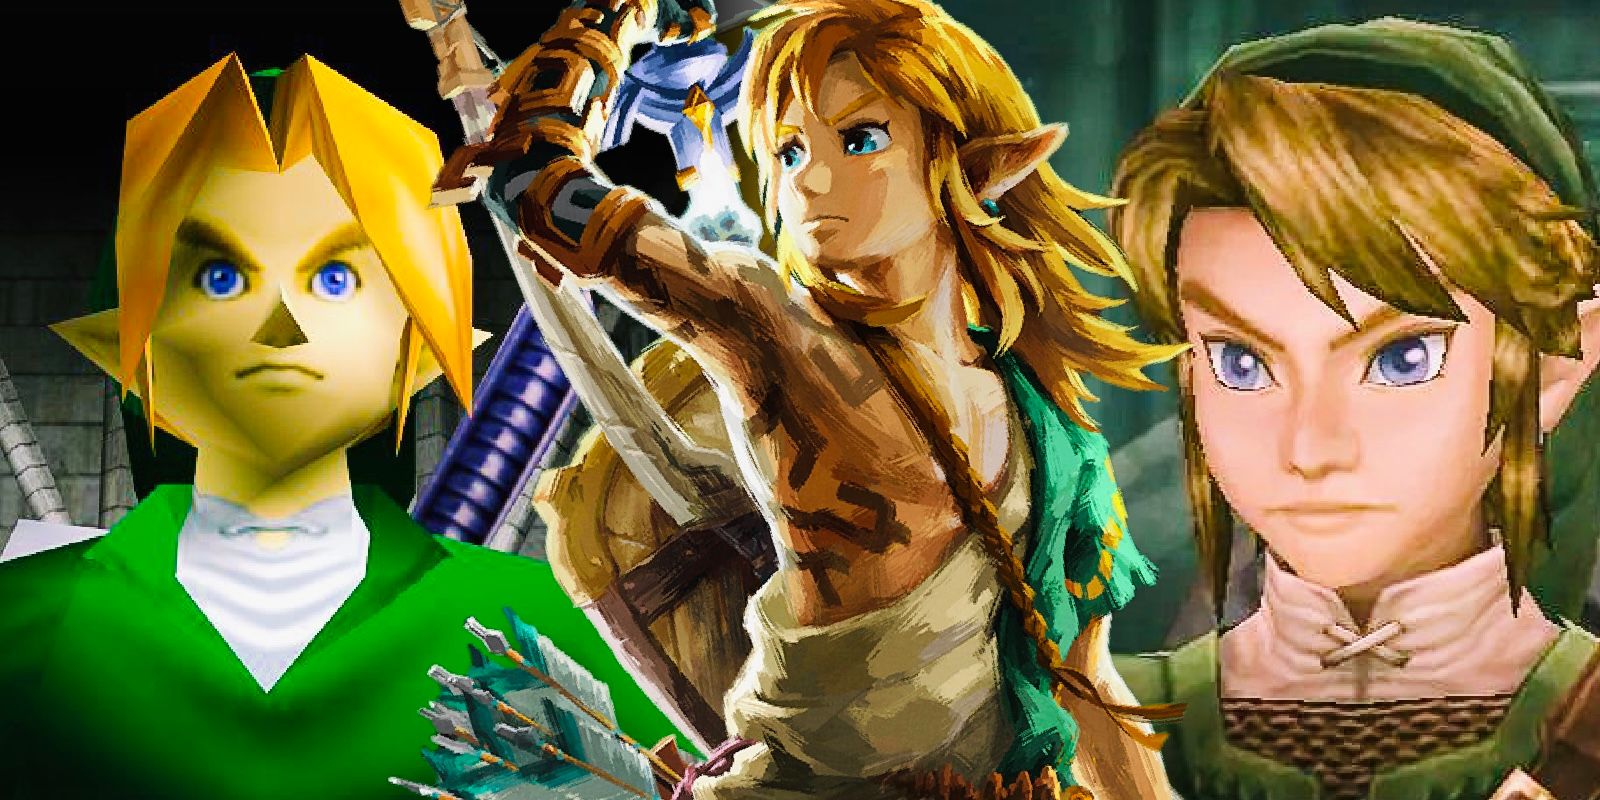 Why Is It Called The Legend Of Zelda When Link Is The Main Character?